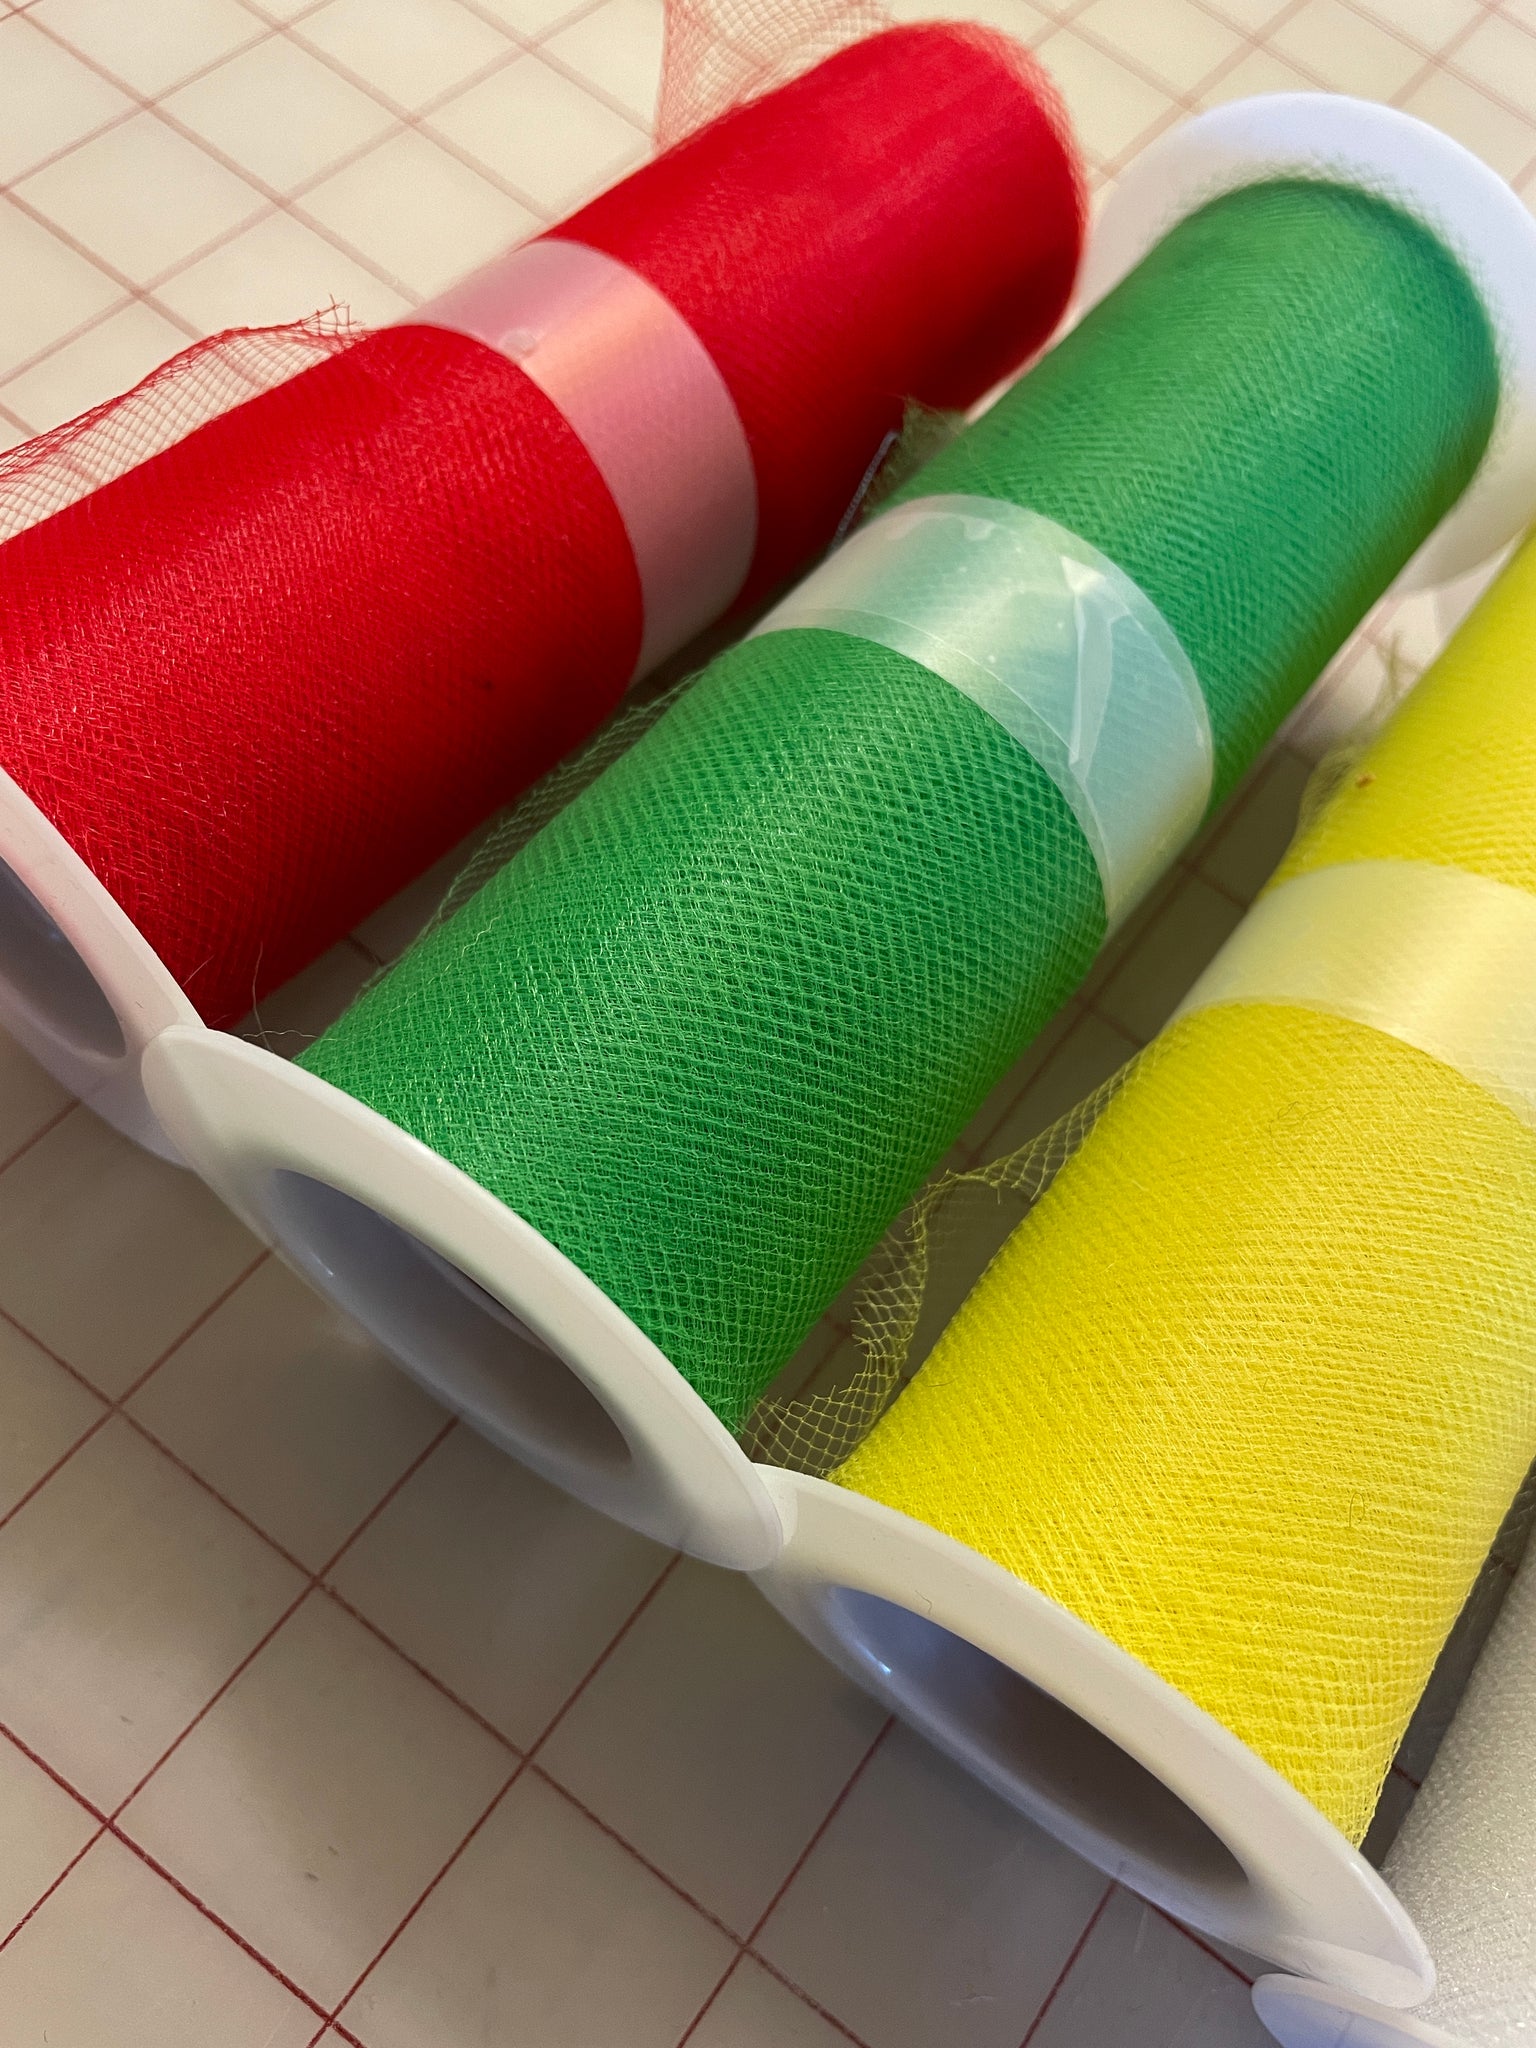 Spools of Tulle Bundle - Red, Green, Yellow and White